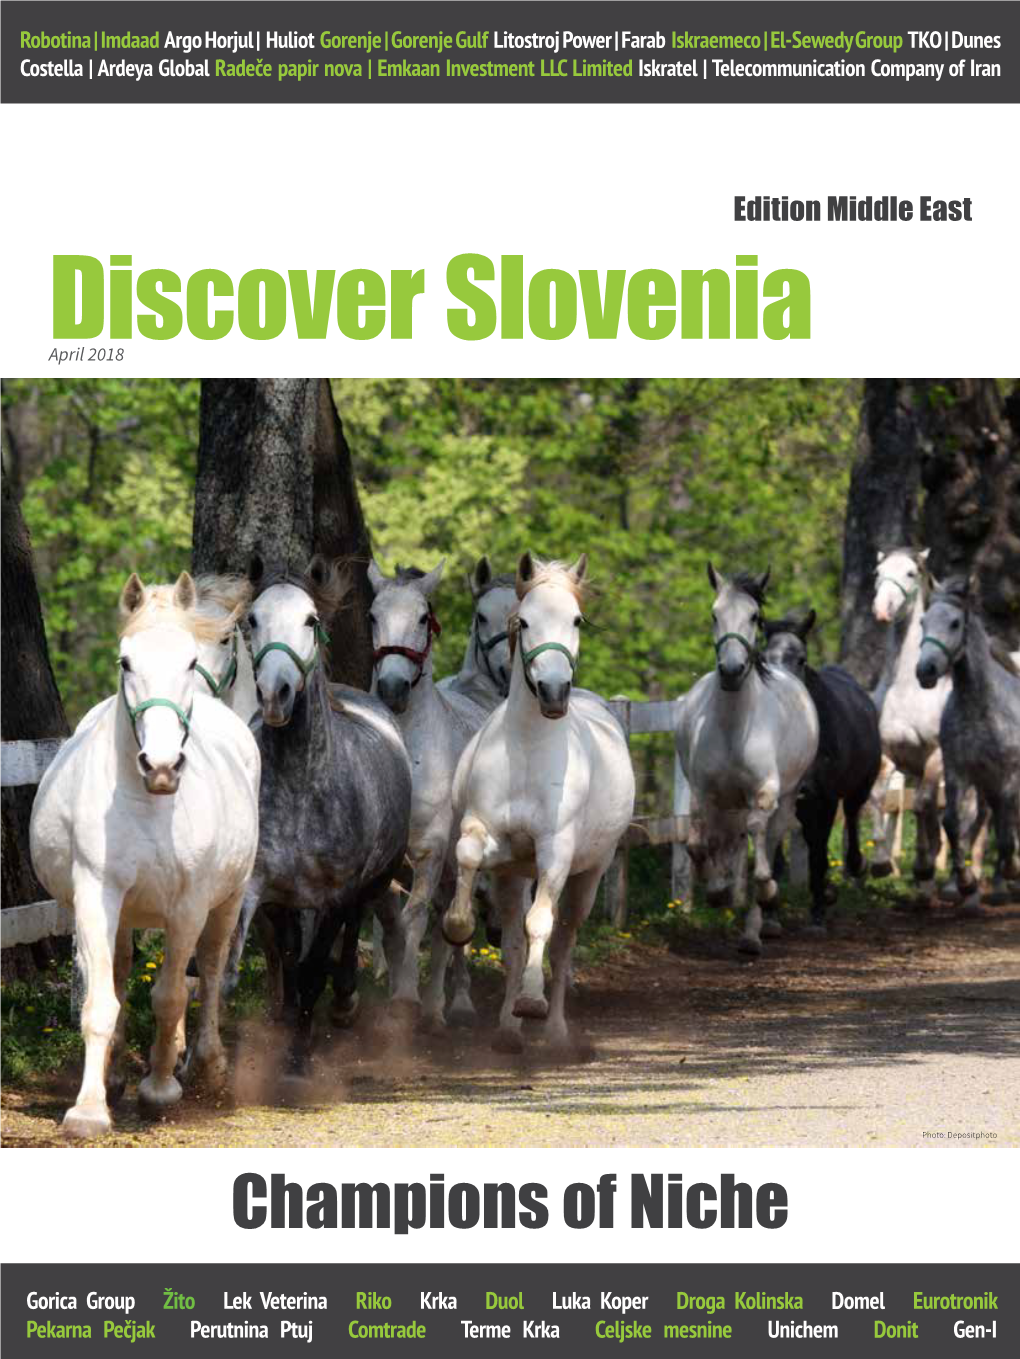 Discover Slovenia Edition Middle East April 2018